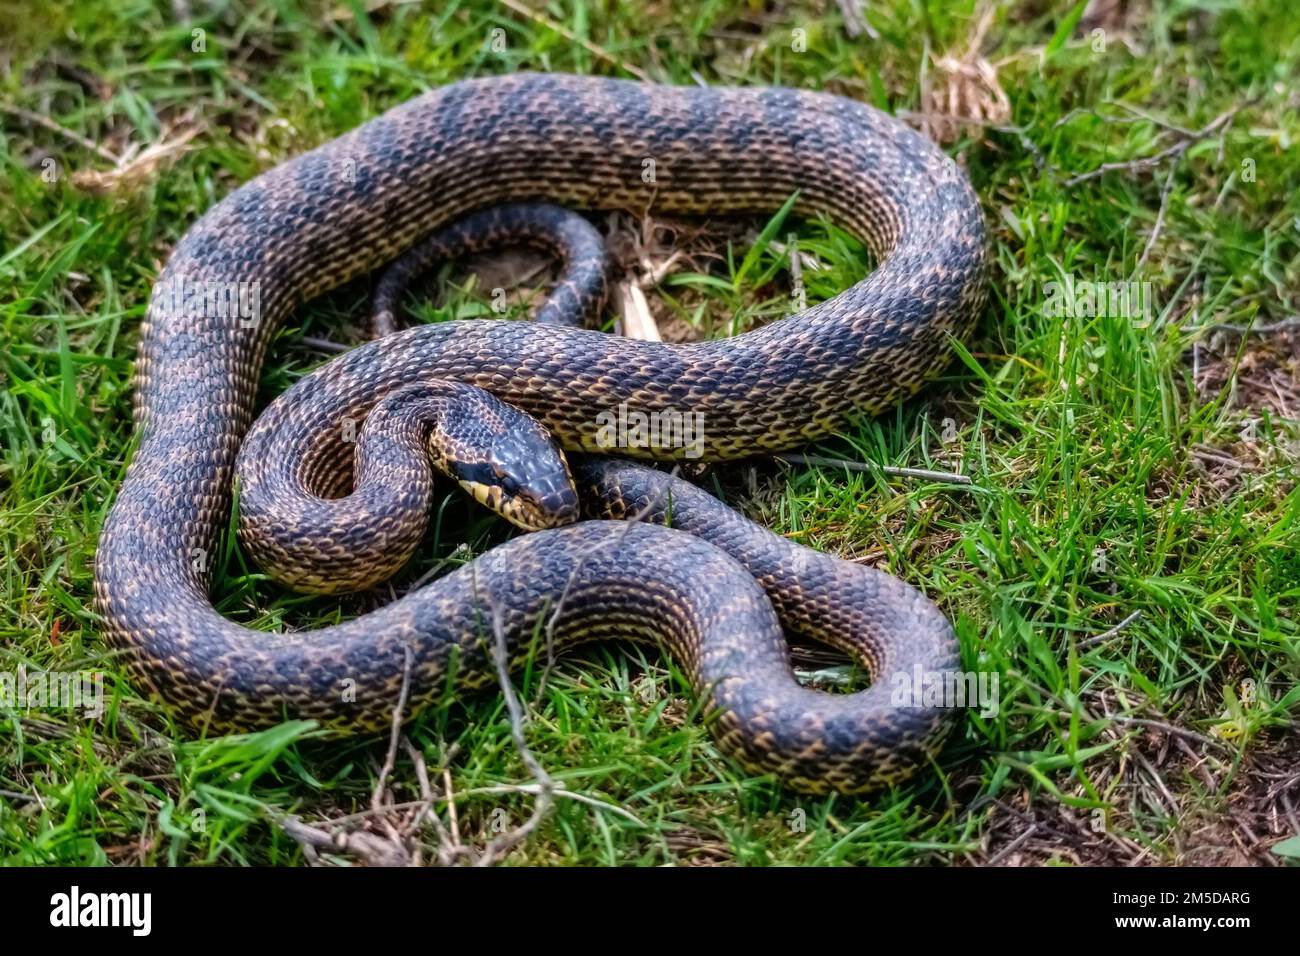 Close-up of blotched snake or Elaphe sauromates in grass Stock Photo